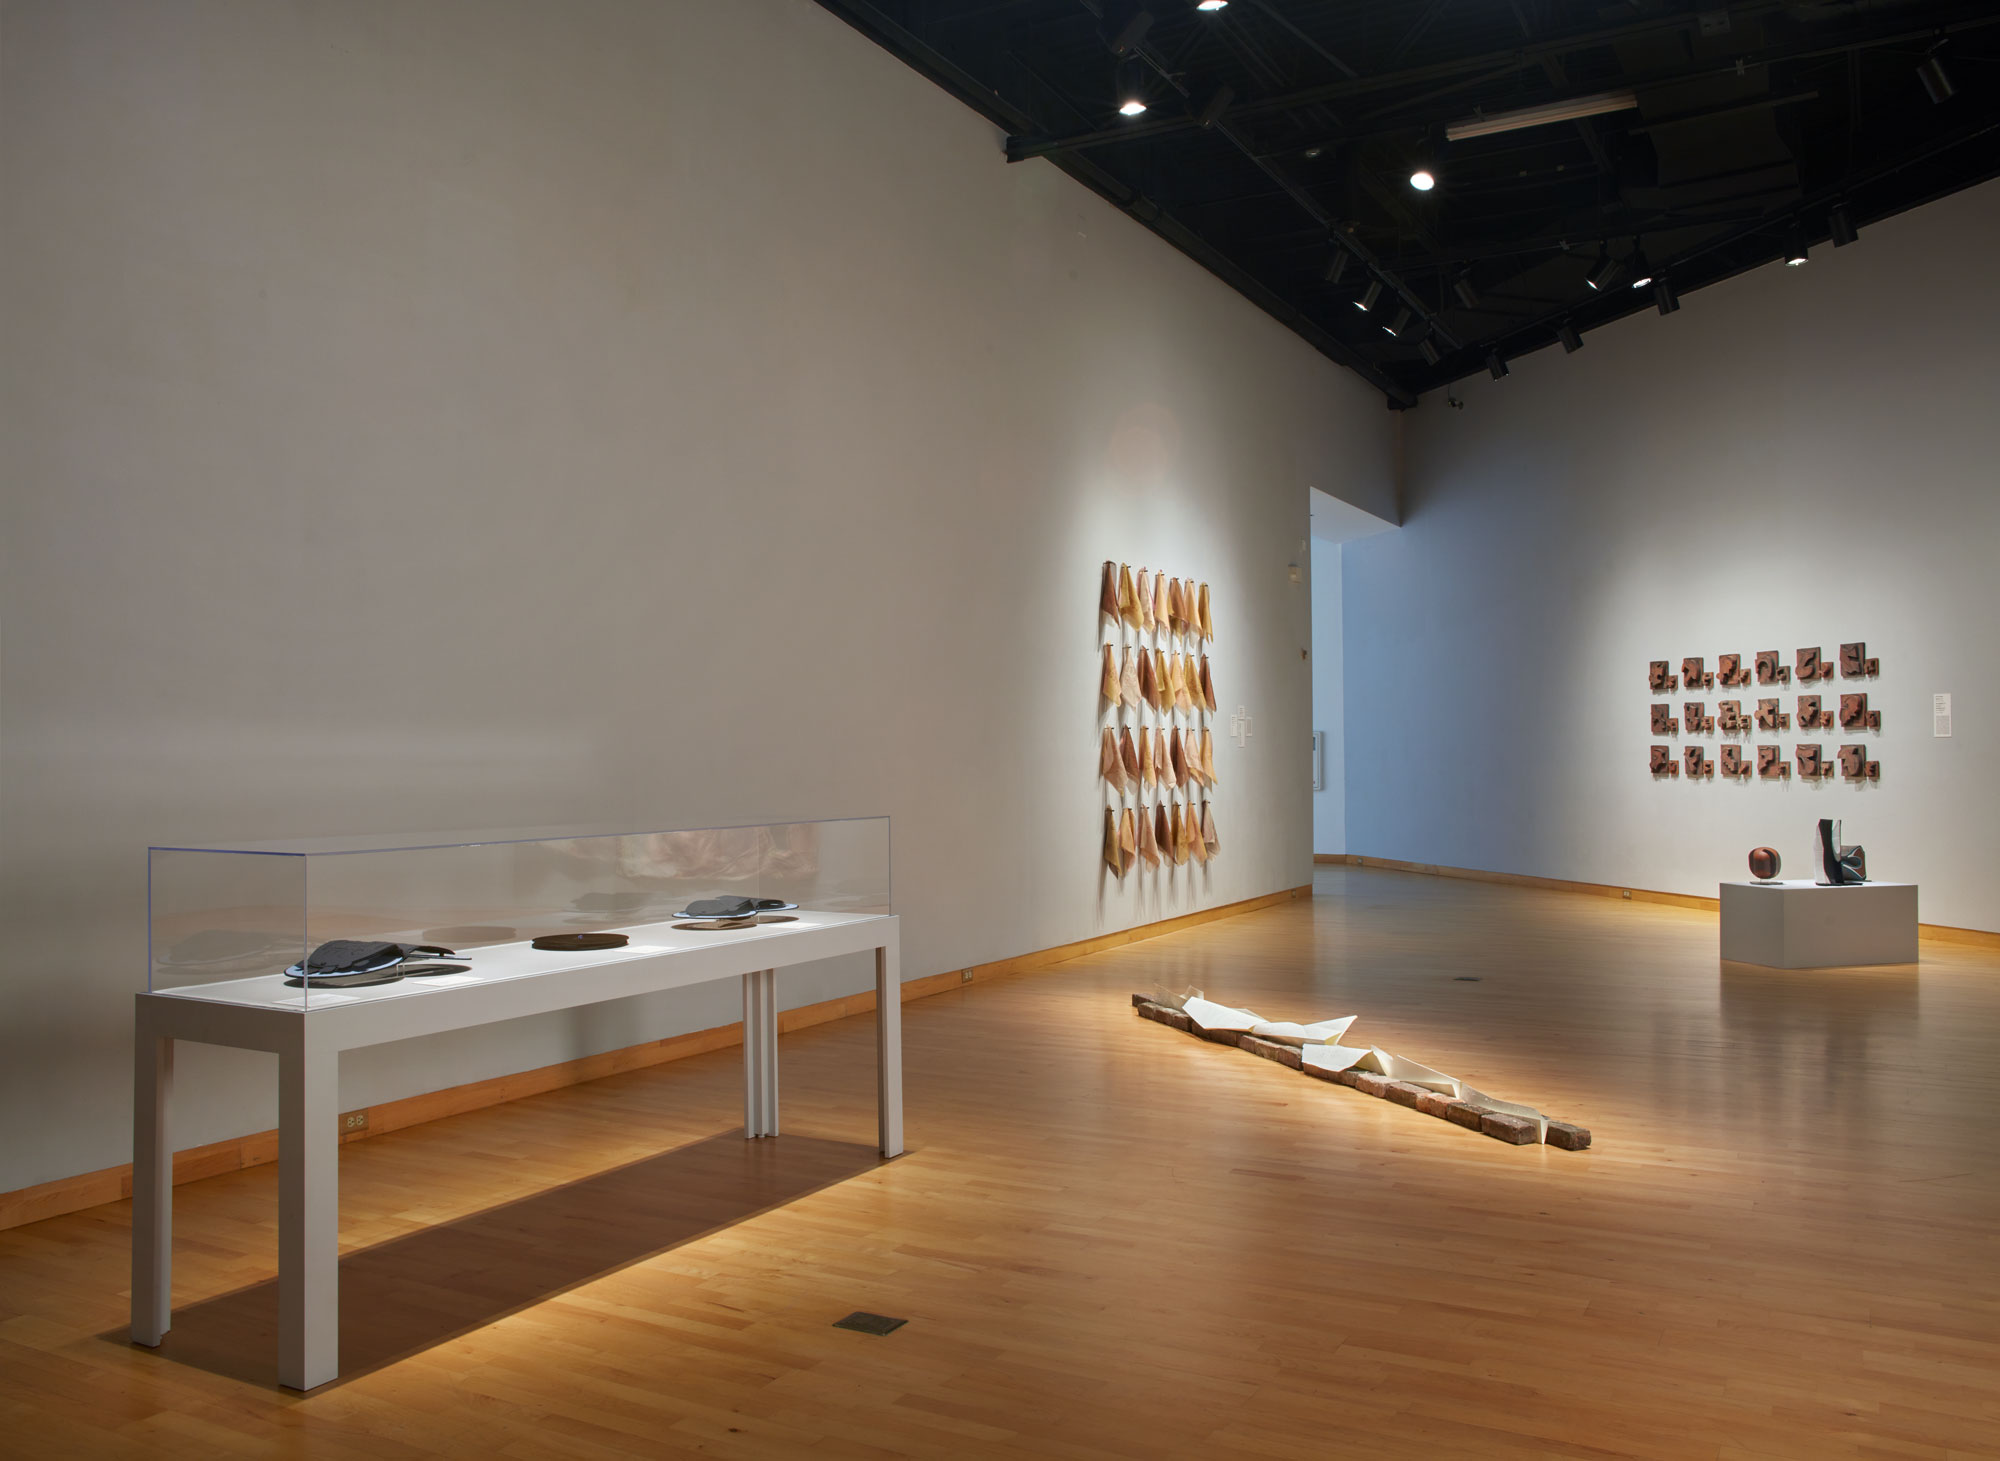 Installation view of Skyway 20/21 exhibition at USF Contemporary Art Museum. Left to right: works by Rosemarie Chiarlone and Kodi Thompson. Photo: Will Lytch.